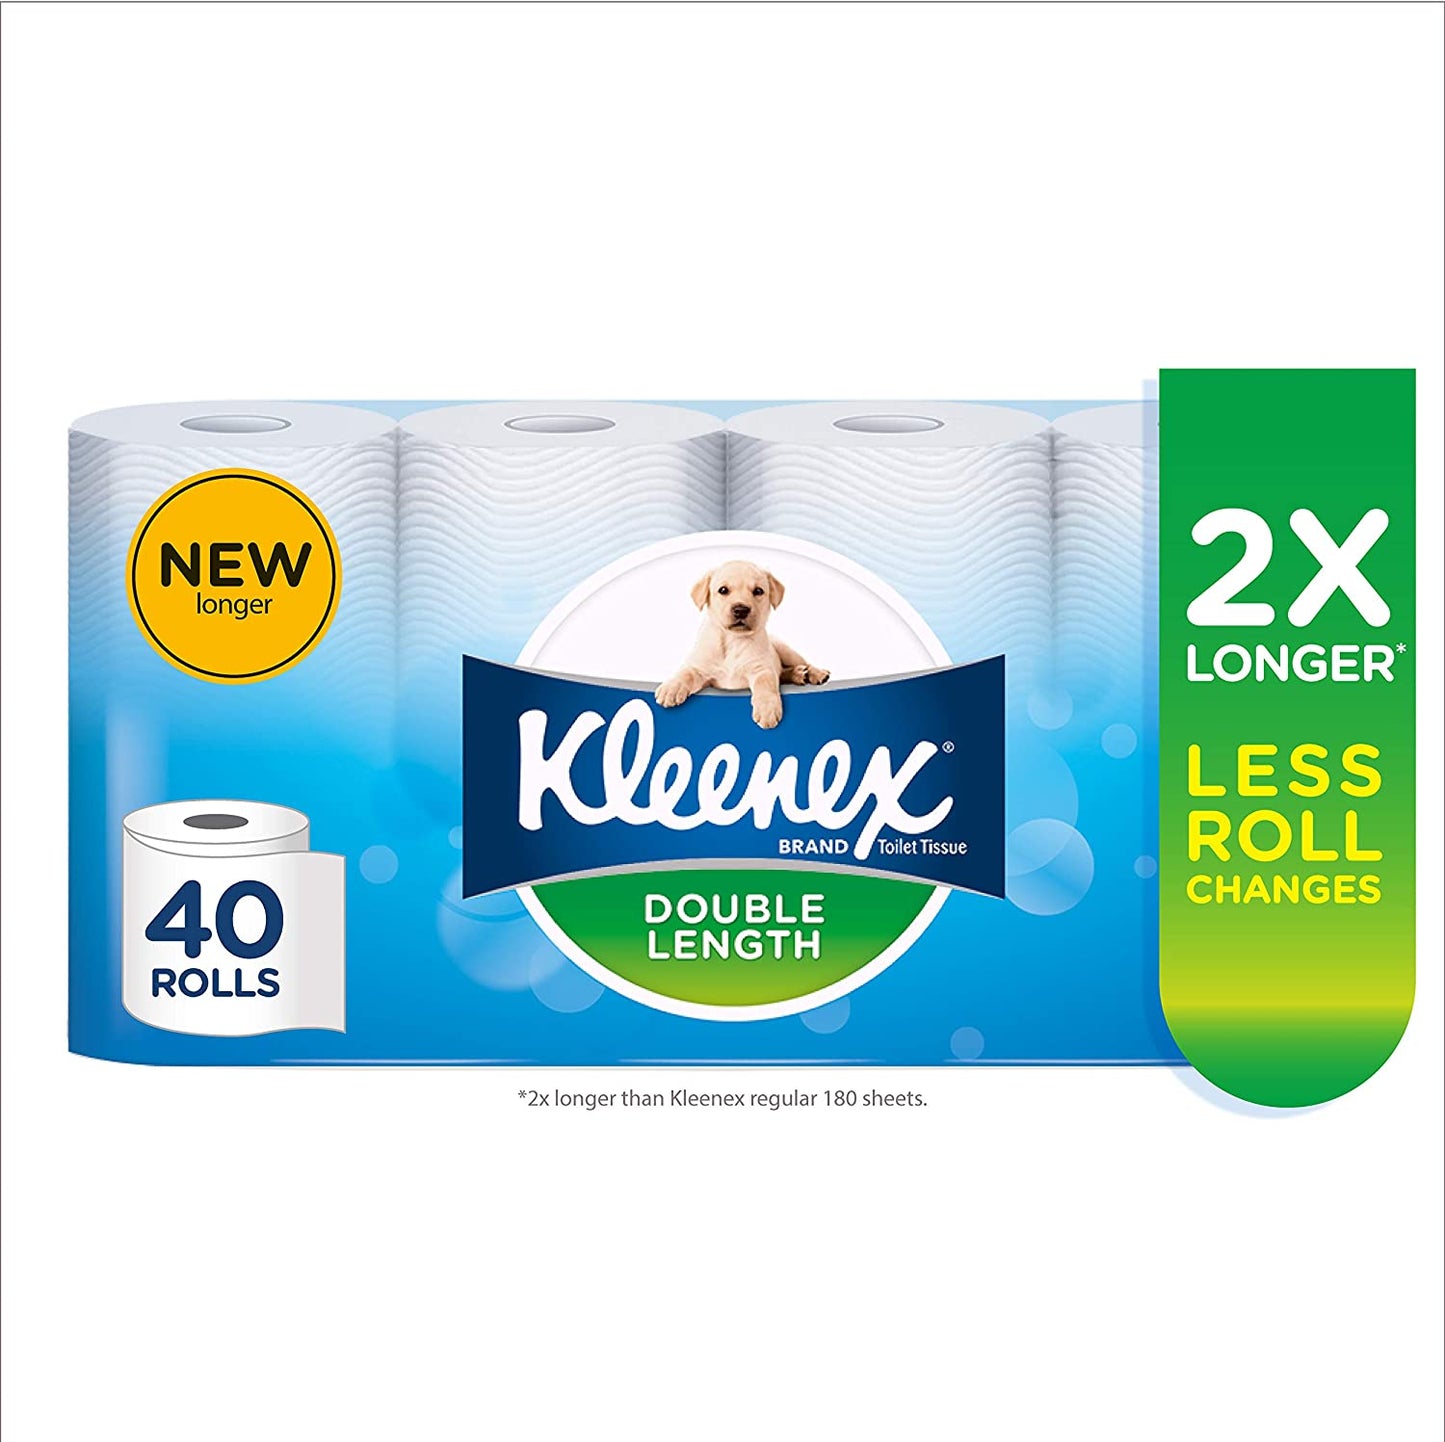 Kleenex Double Length Toilet Paper 40 Rolls in a box